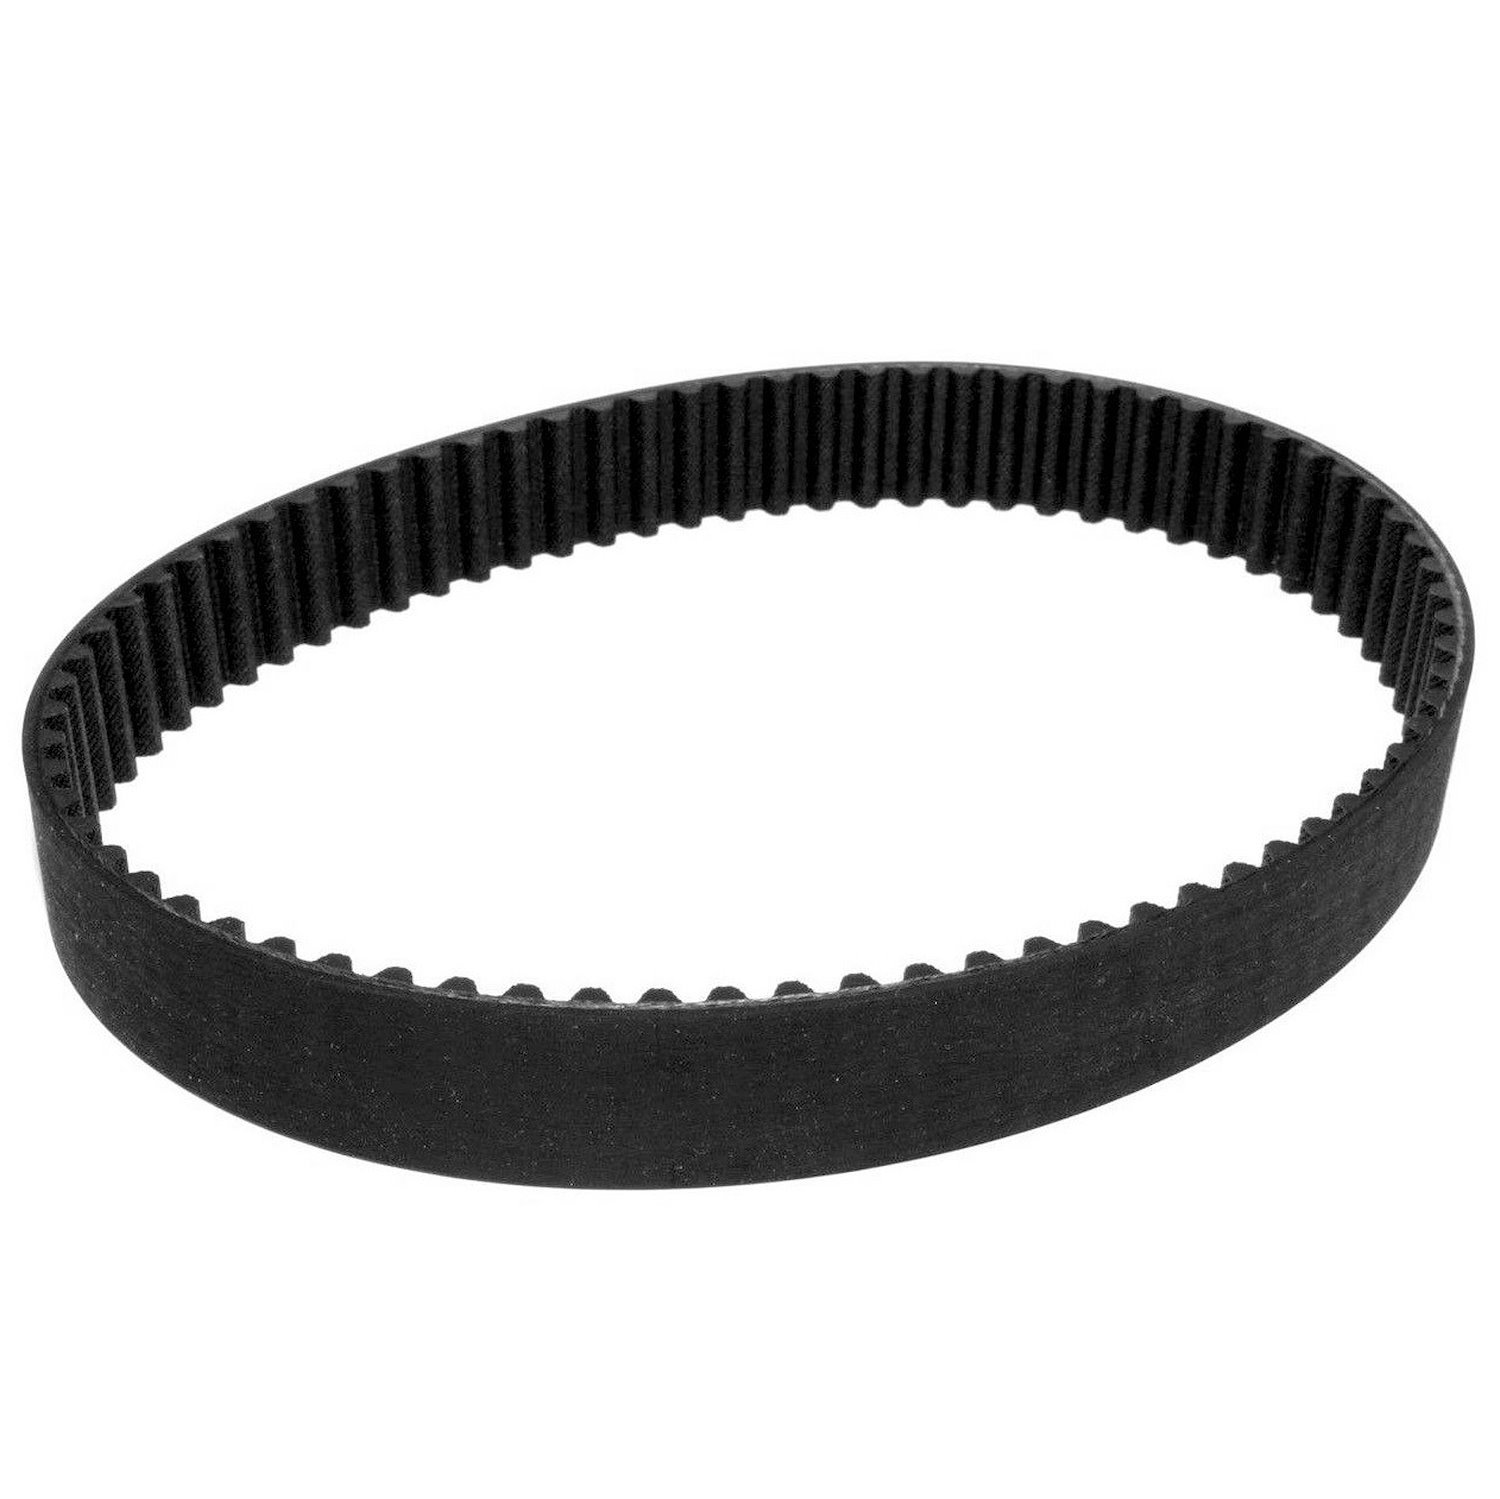 Replacement Timing Belt for Speedmaster PCE262.1003